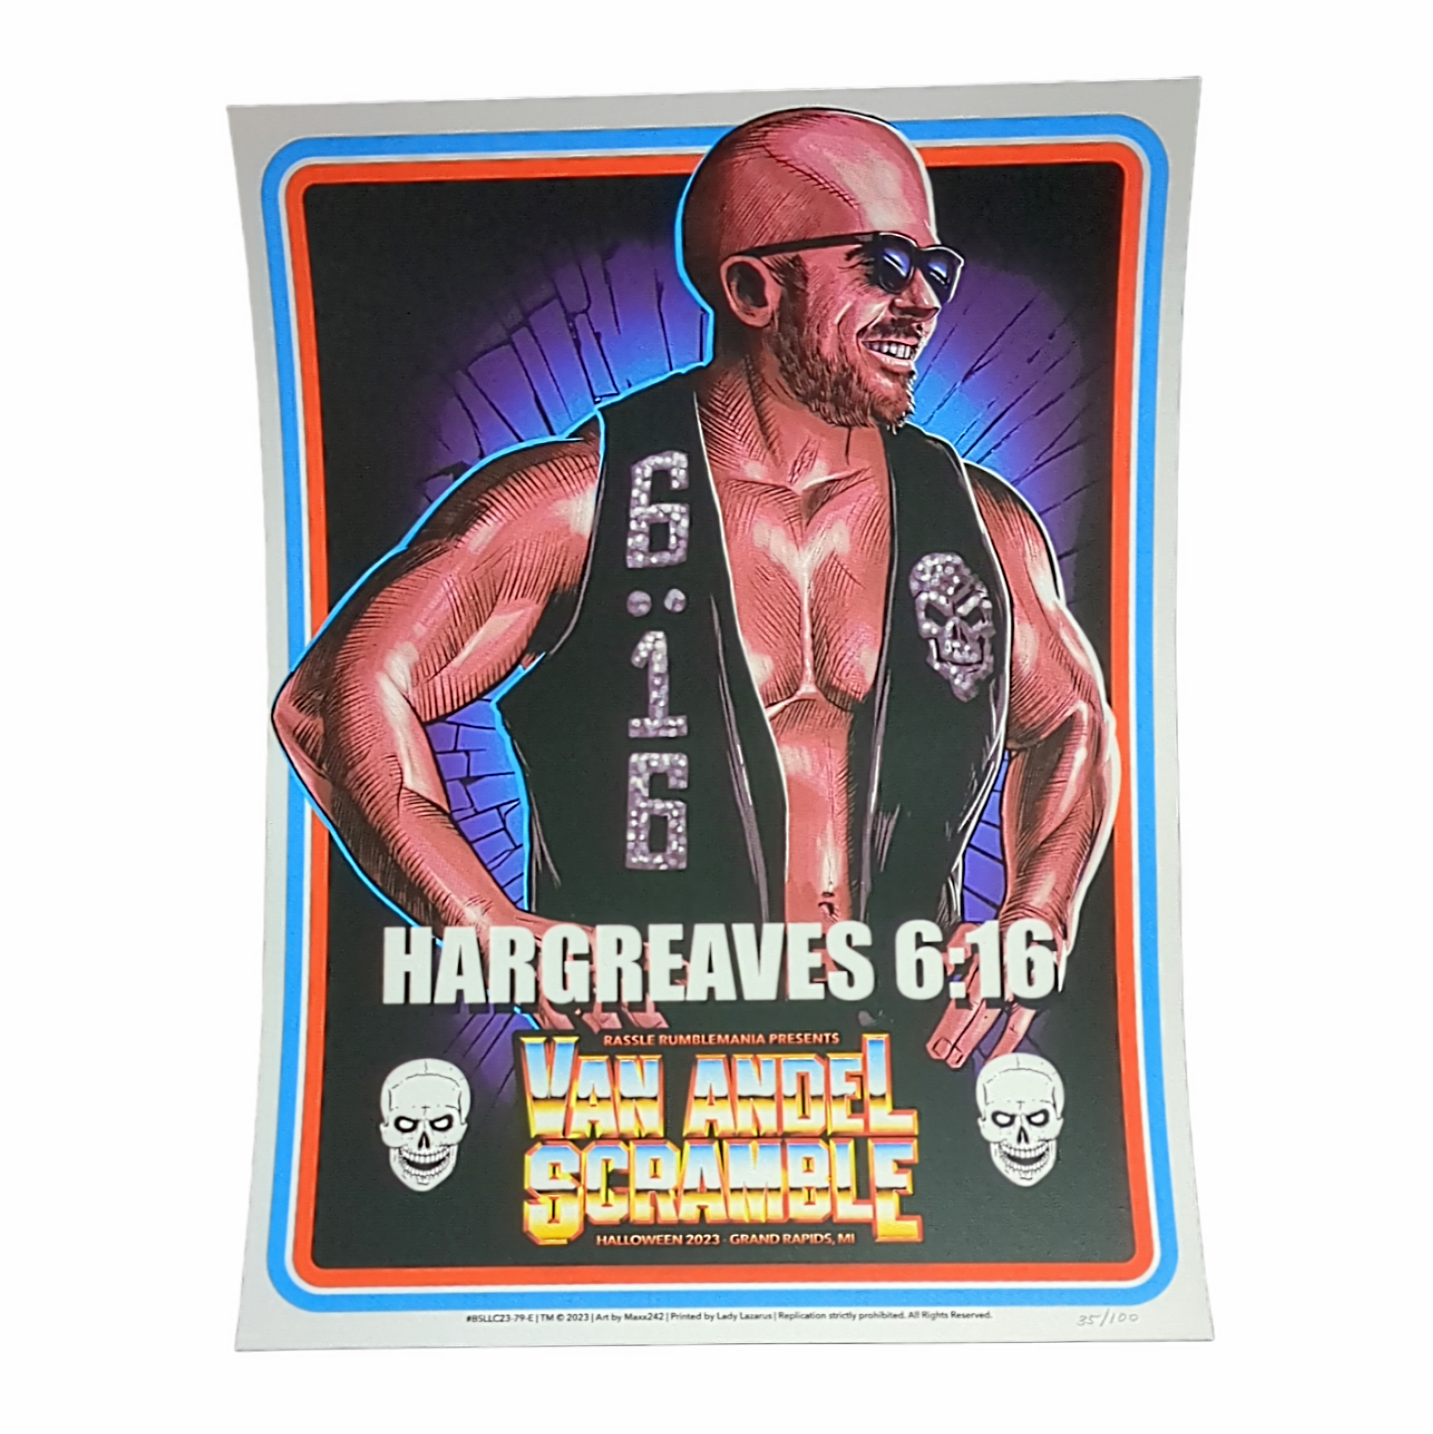 Maxxer Billy Strings Van Andel Scramble Grand Rapids, Michigan 2023 Alex Hargreaves as Stone Cold Steve Austin Character Print 9 x 12 in Edition of 100